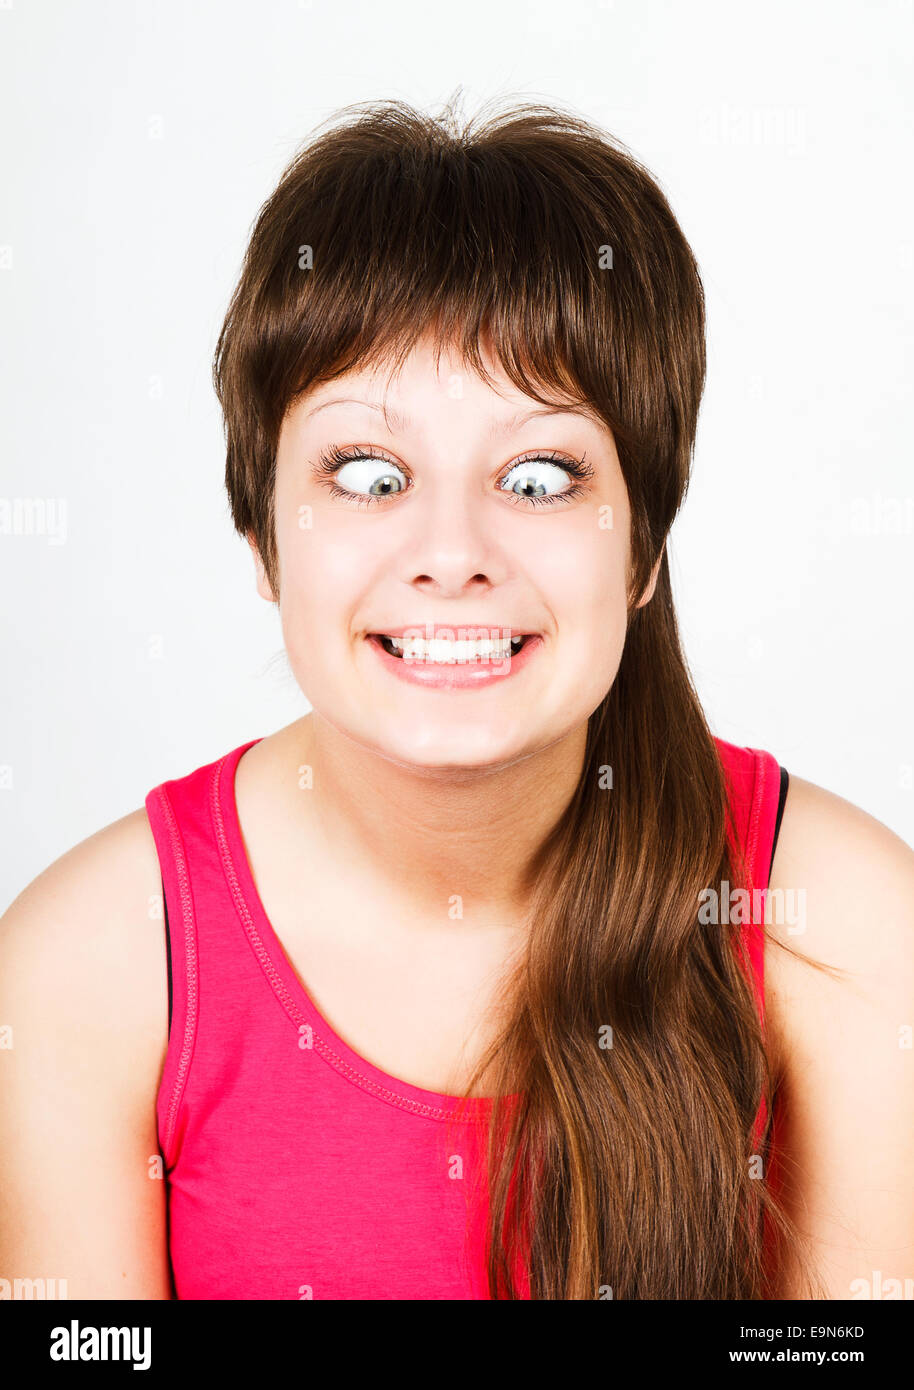 cross eyed squinting expression girl Stock Photo